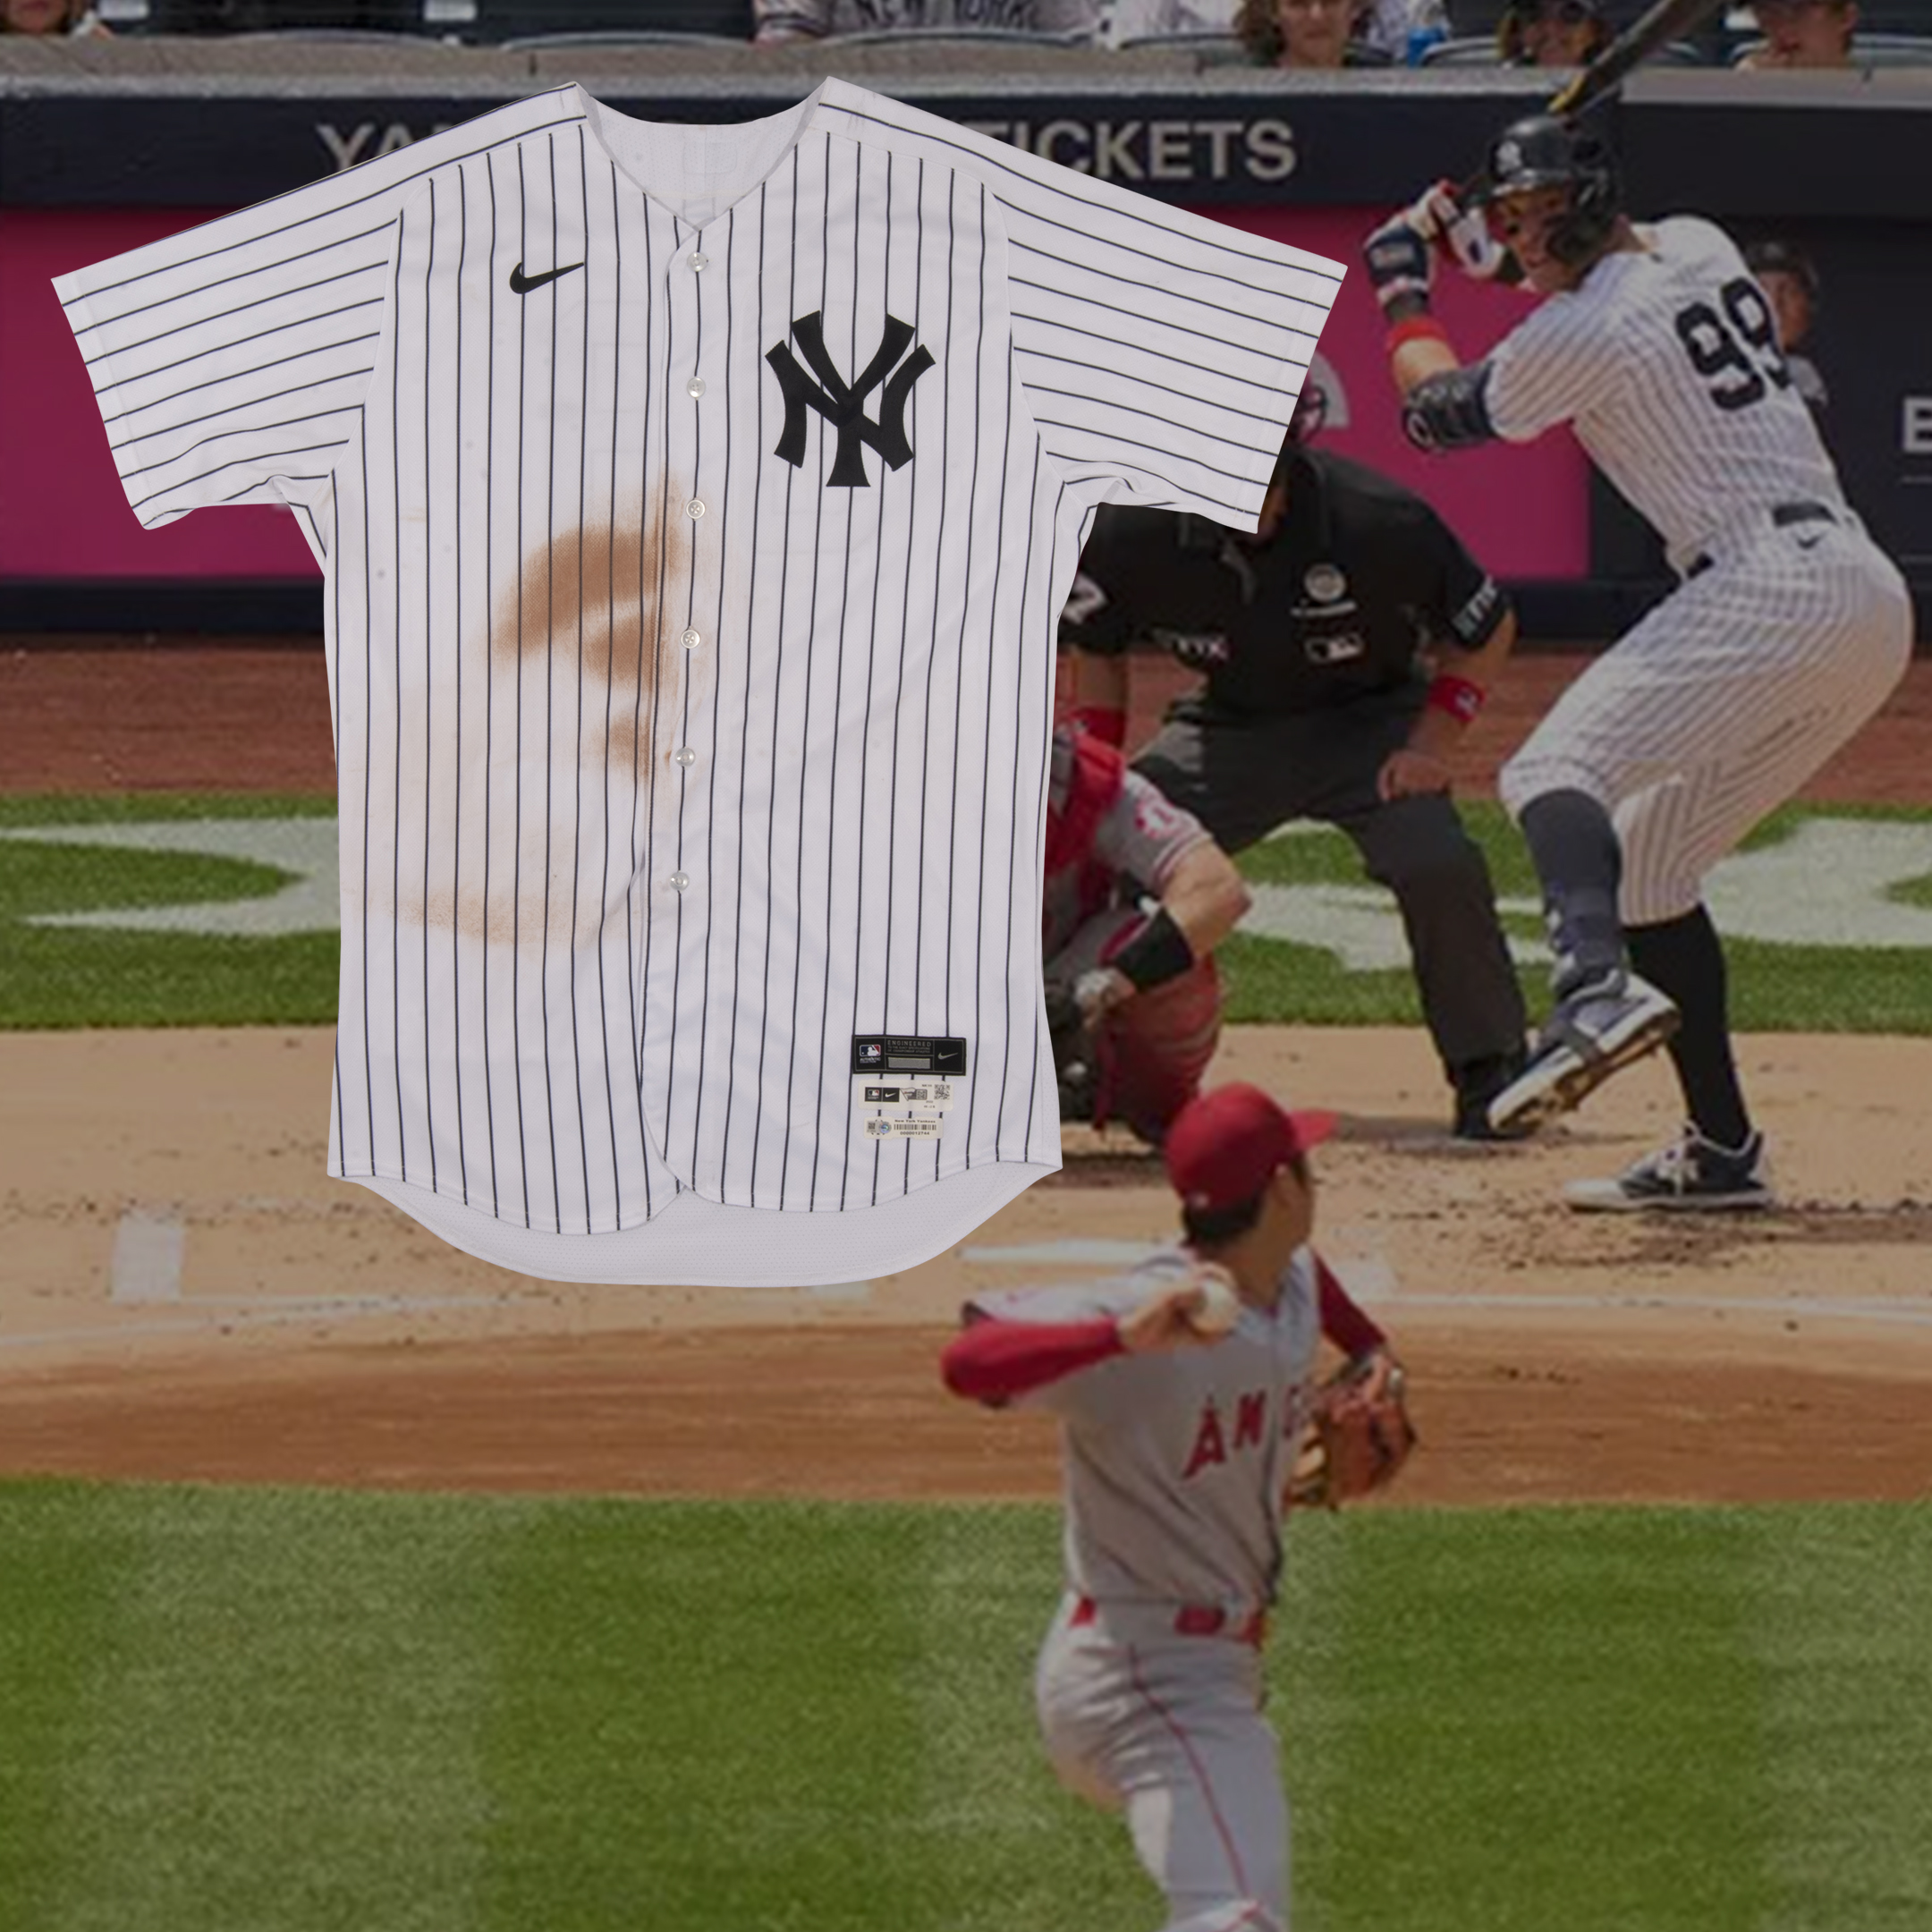 2022 Aaron Judge NY Yankees Game Worn, Signed & Inscribed Three Home Run  Jersey from AL Record 62-Homer Season incl. HR #19 off Shohei Ohtani -  Photomatched to 7 Games! - ResMatch